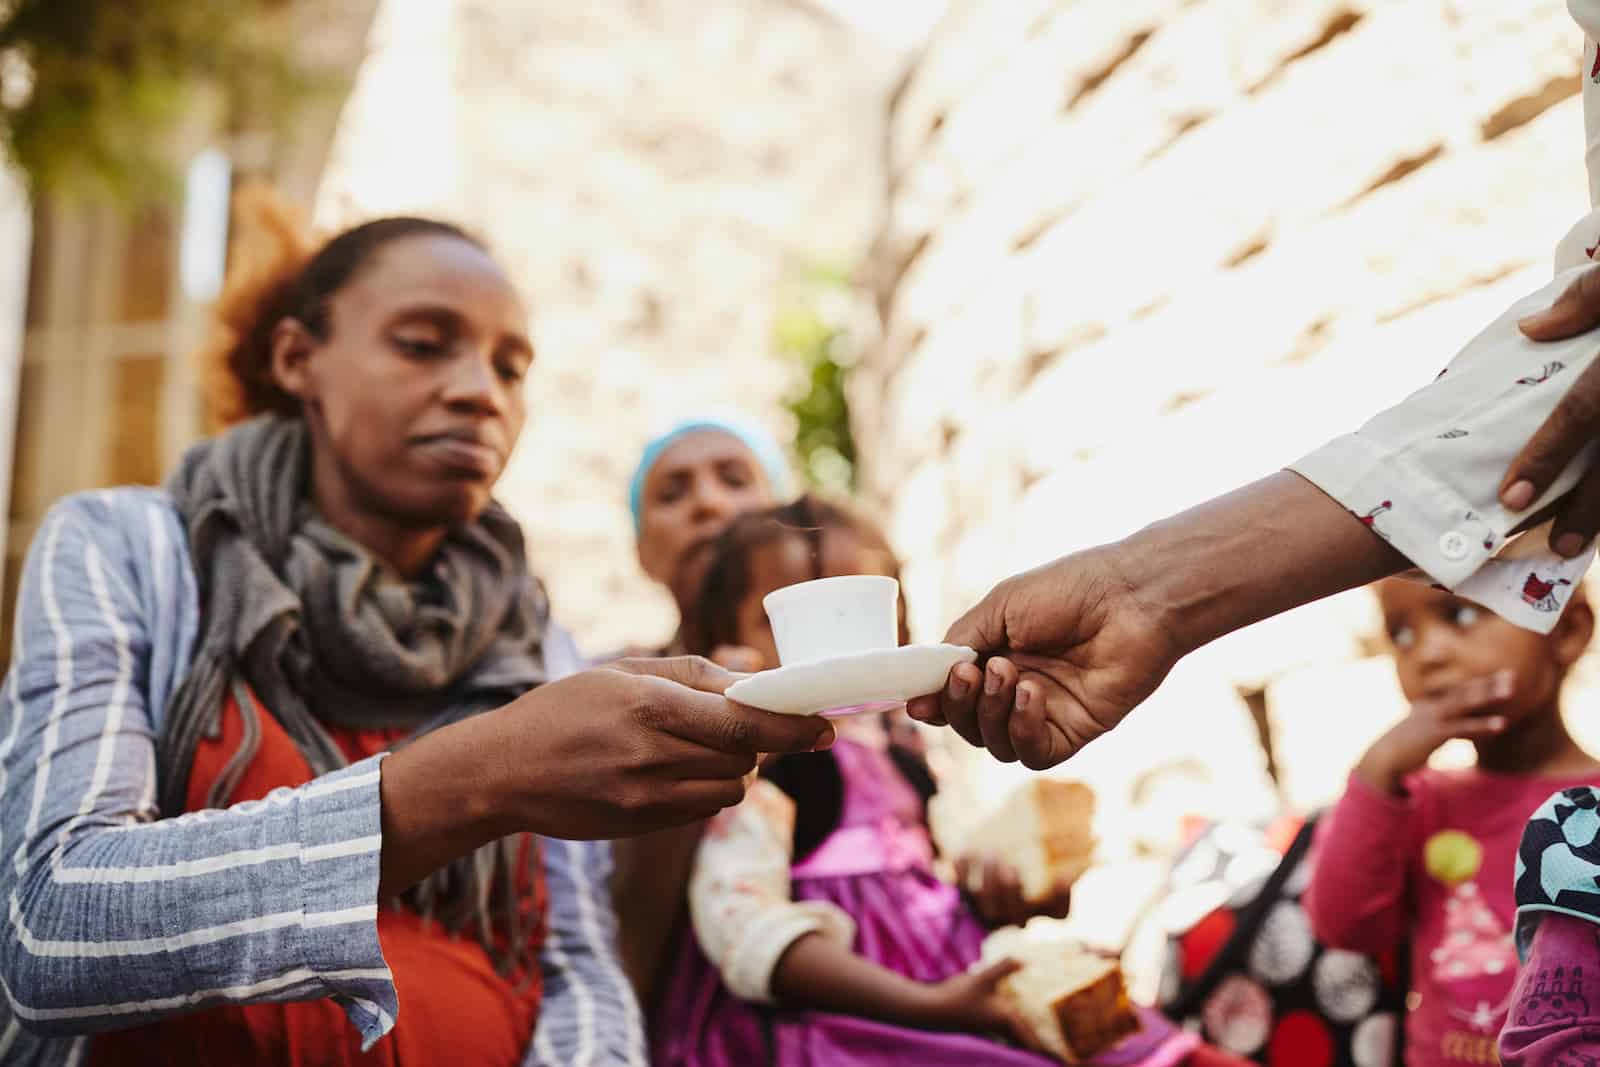 A woman is handed a small cup of coffee.